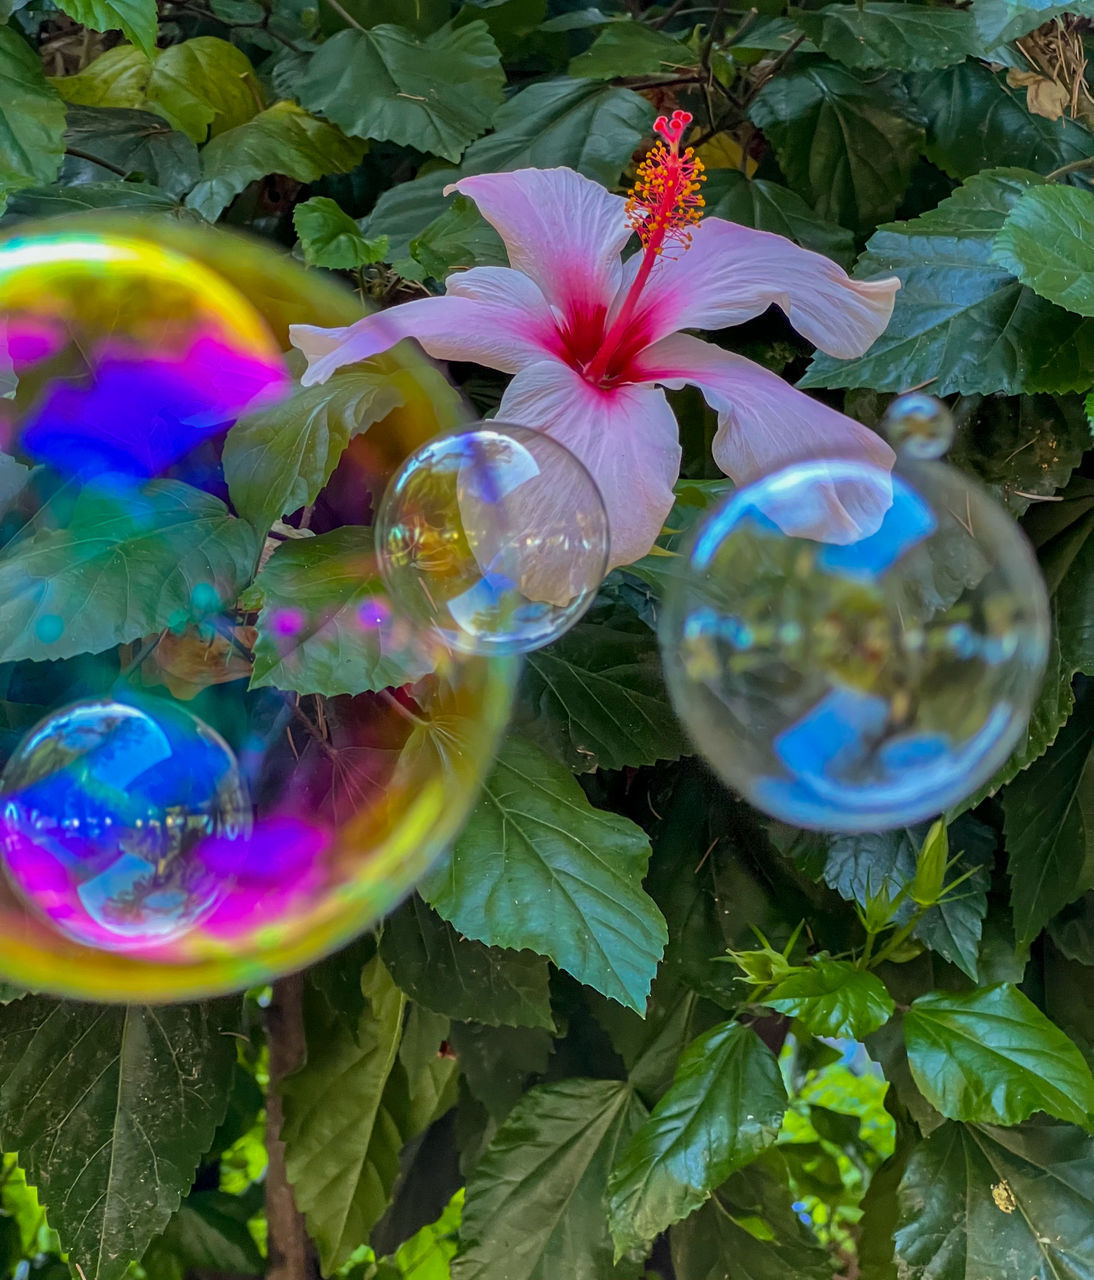 fragility, plant, flower, bubble, nature, multi colored, liquid bubble, beauty in nature, close-up, leaf, transparent, no people, flowering plant, growth, plant part, day, soap sud, outdoors, sphere, green, freshness, reflection, mid-air, bubble wand